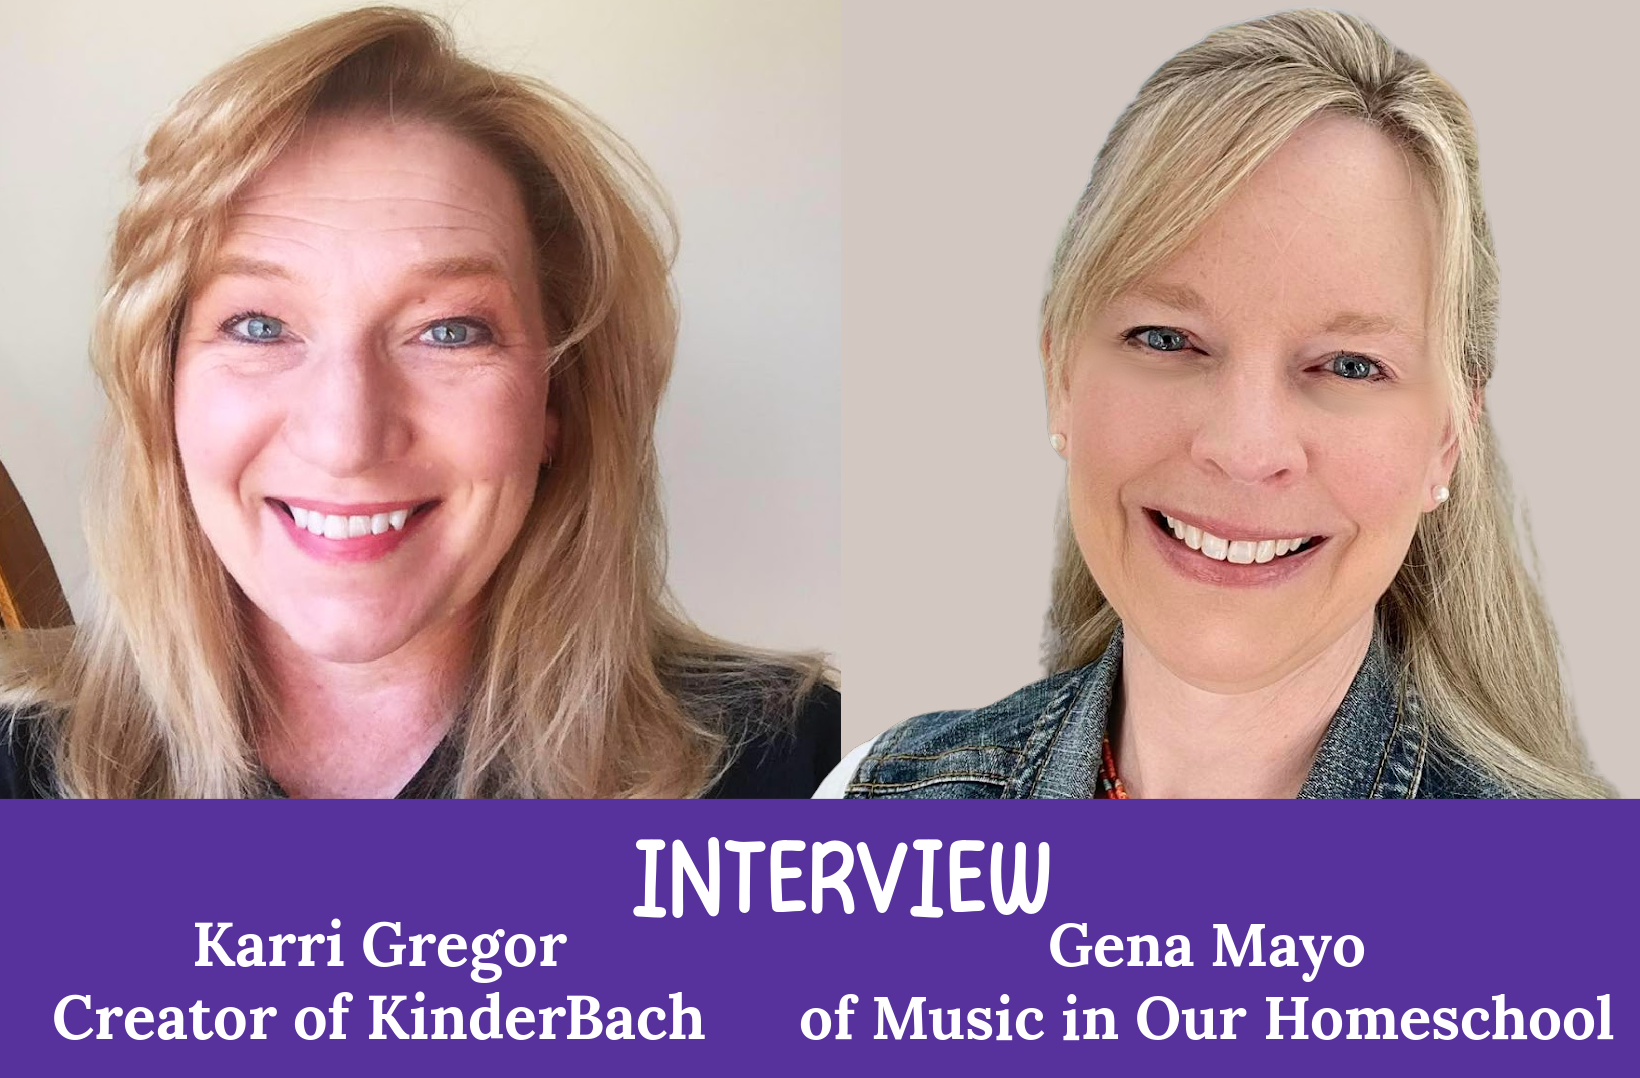 Interview on Zoom Karri Gregor of KinderBach and Gena Mayo of Music in Our Homeschool